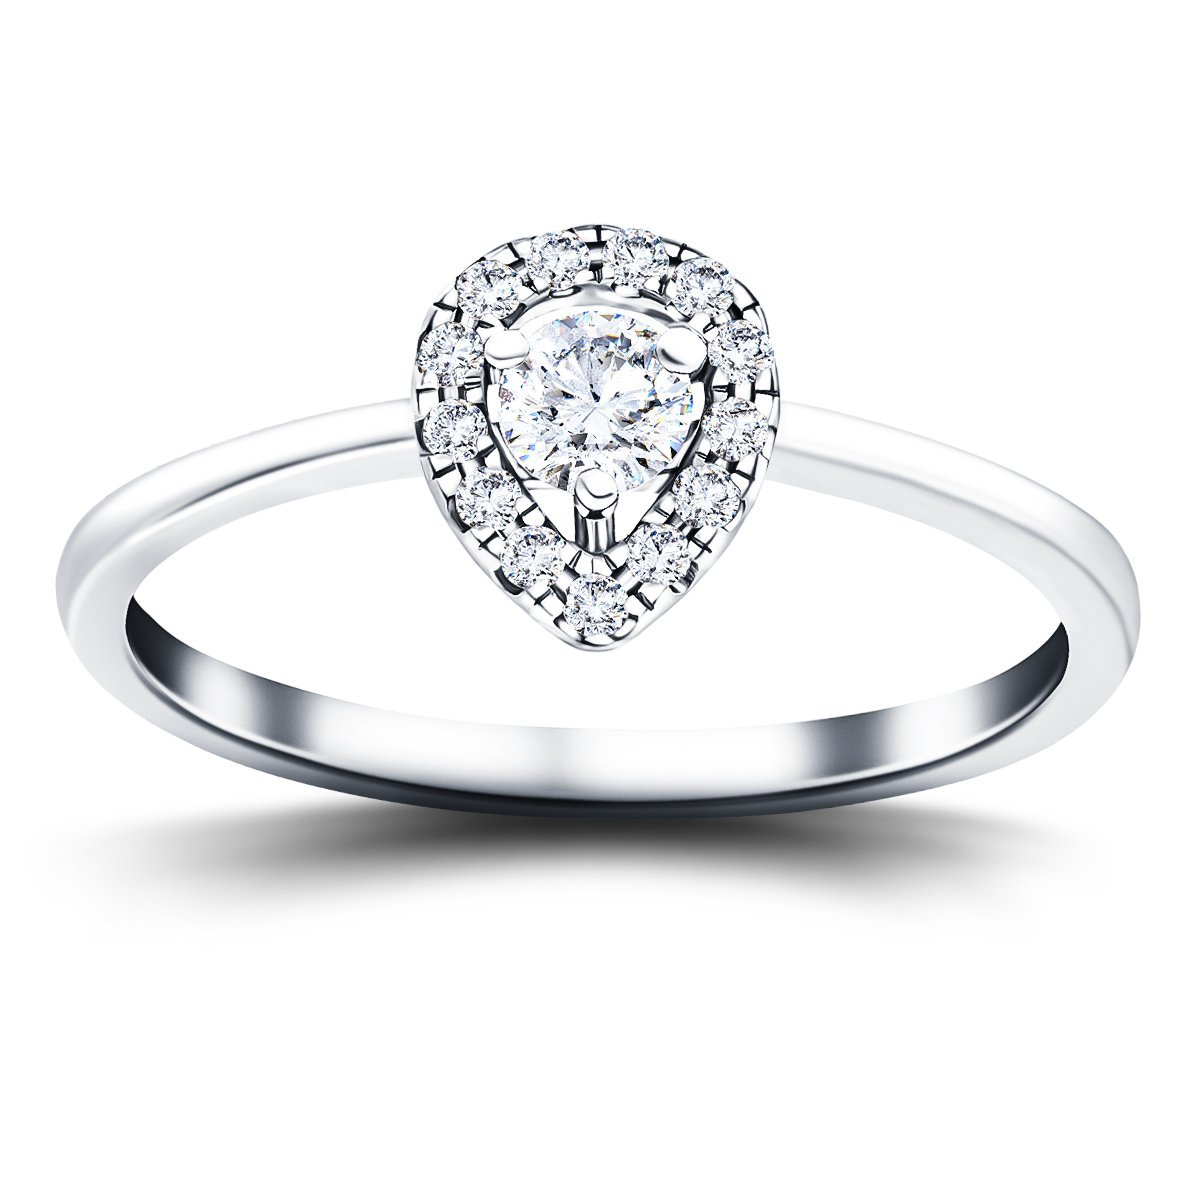 Pear Halo Diamond Engagement Ring with 0.30ct in 18k White Gold - All Diamond